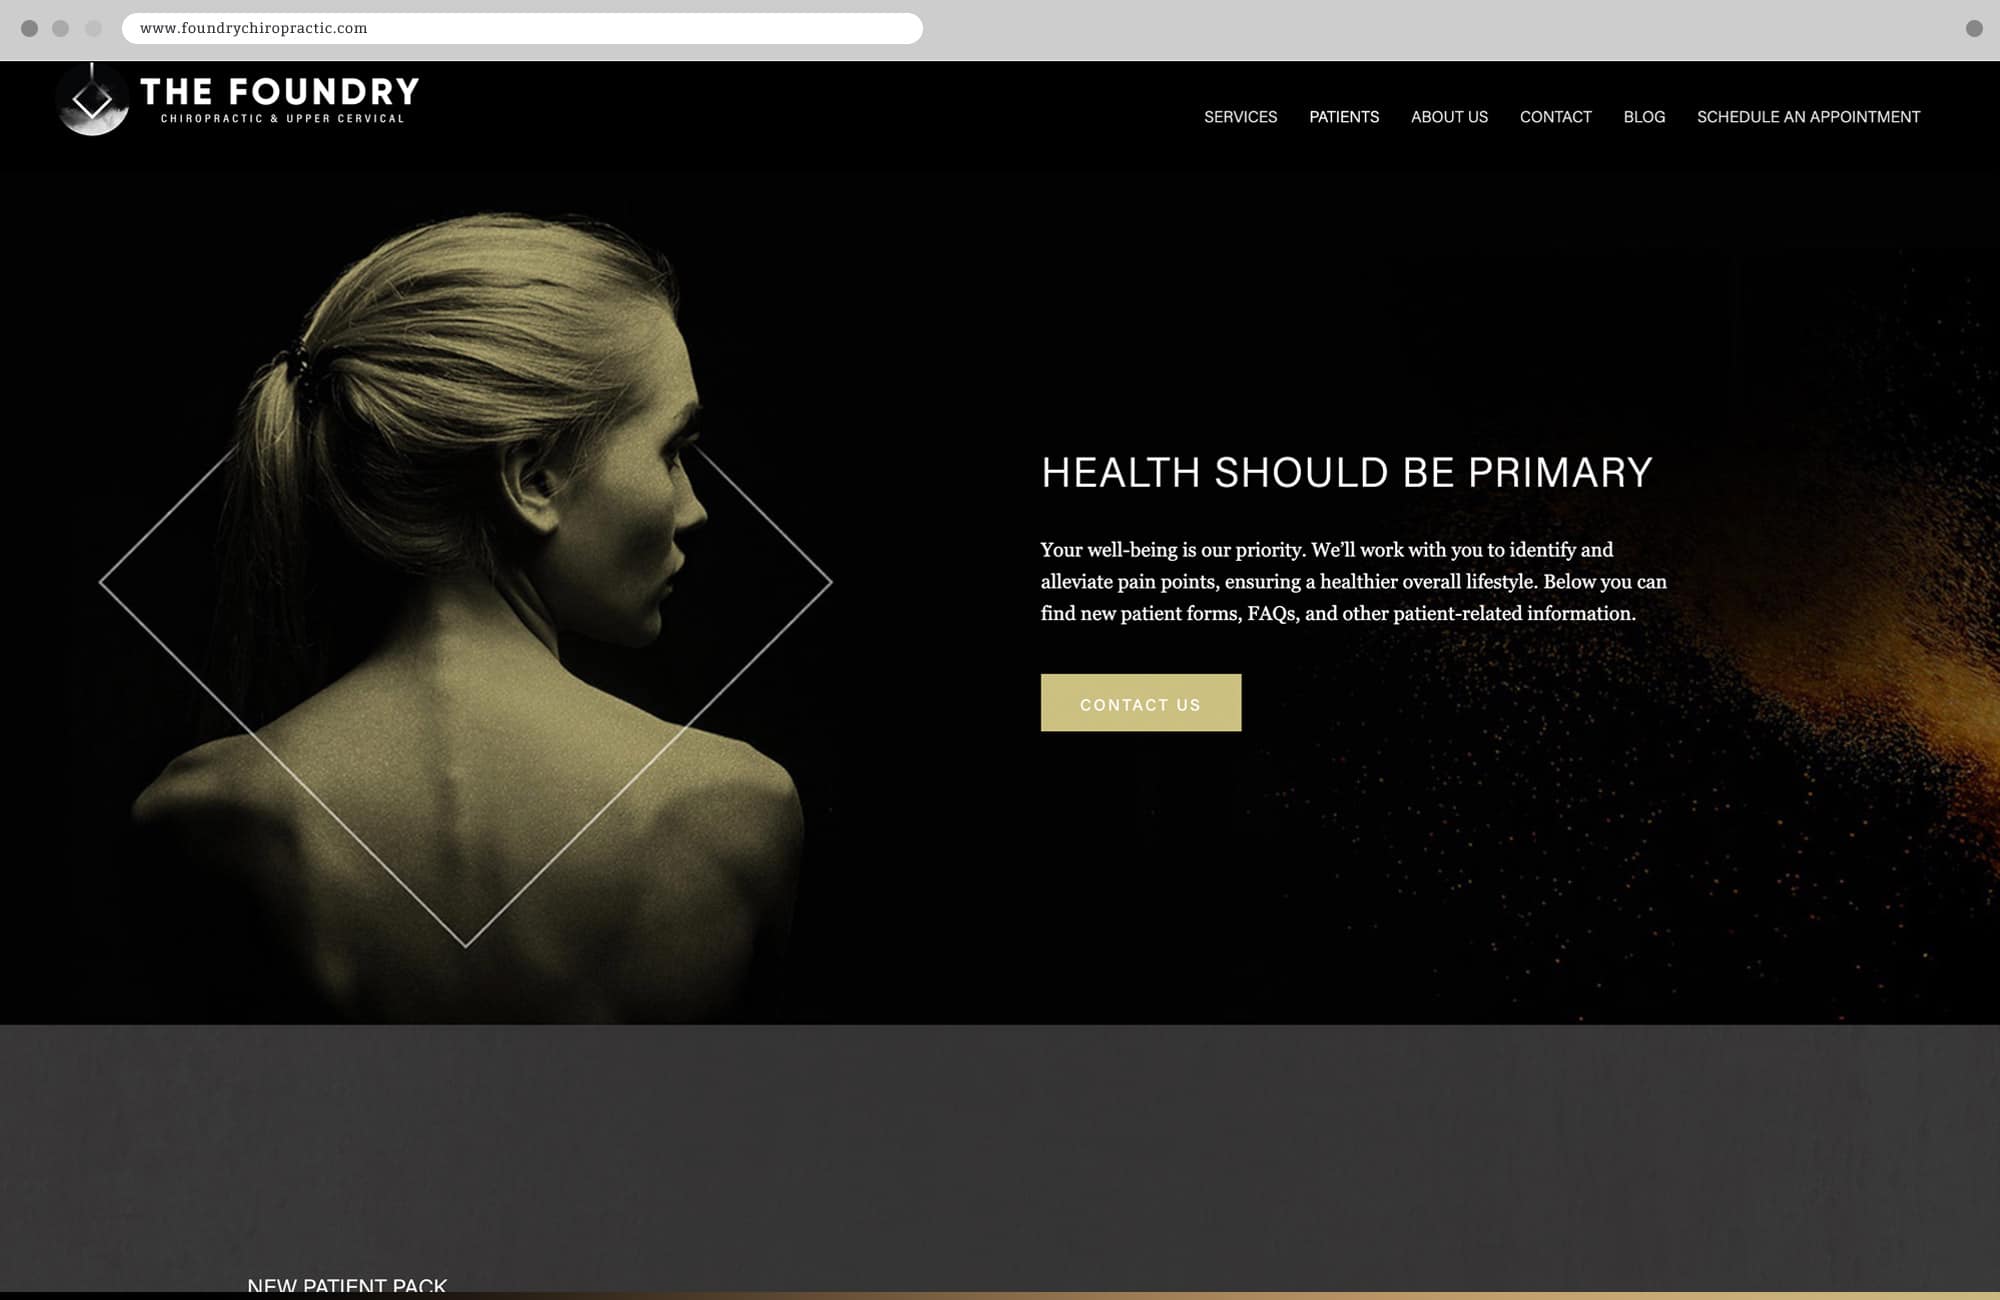 Punch -The Foundry Patients Website Page